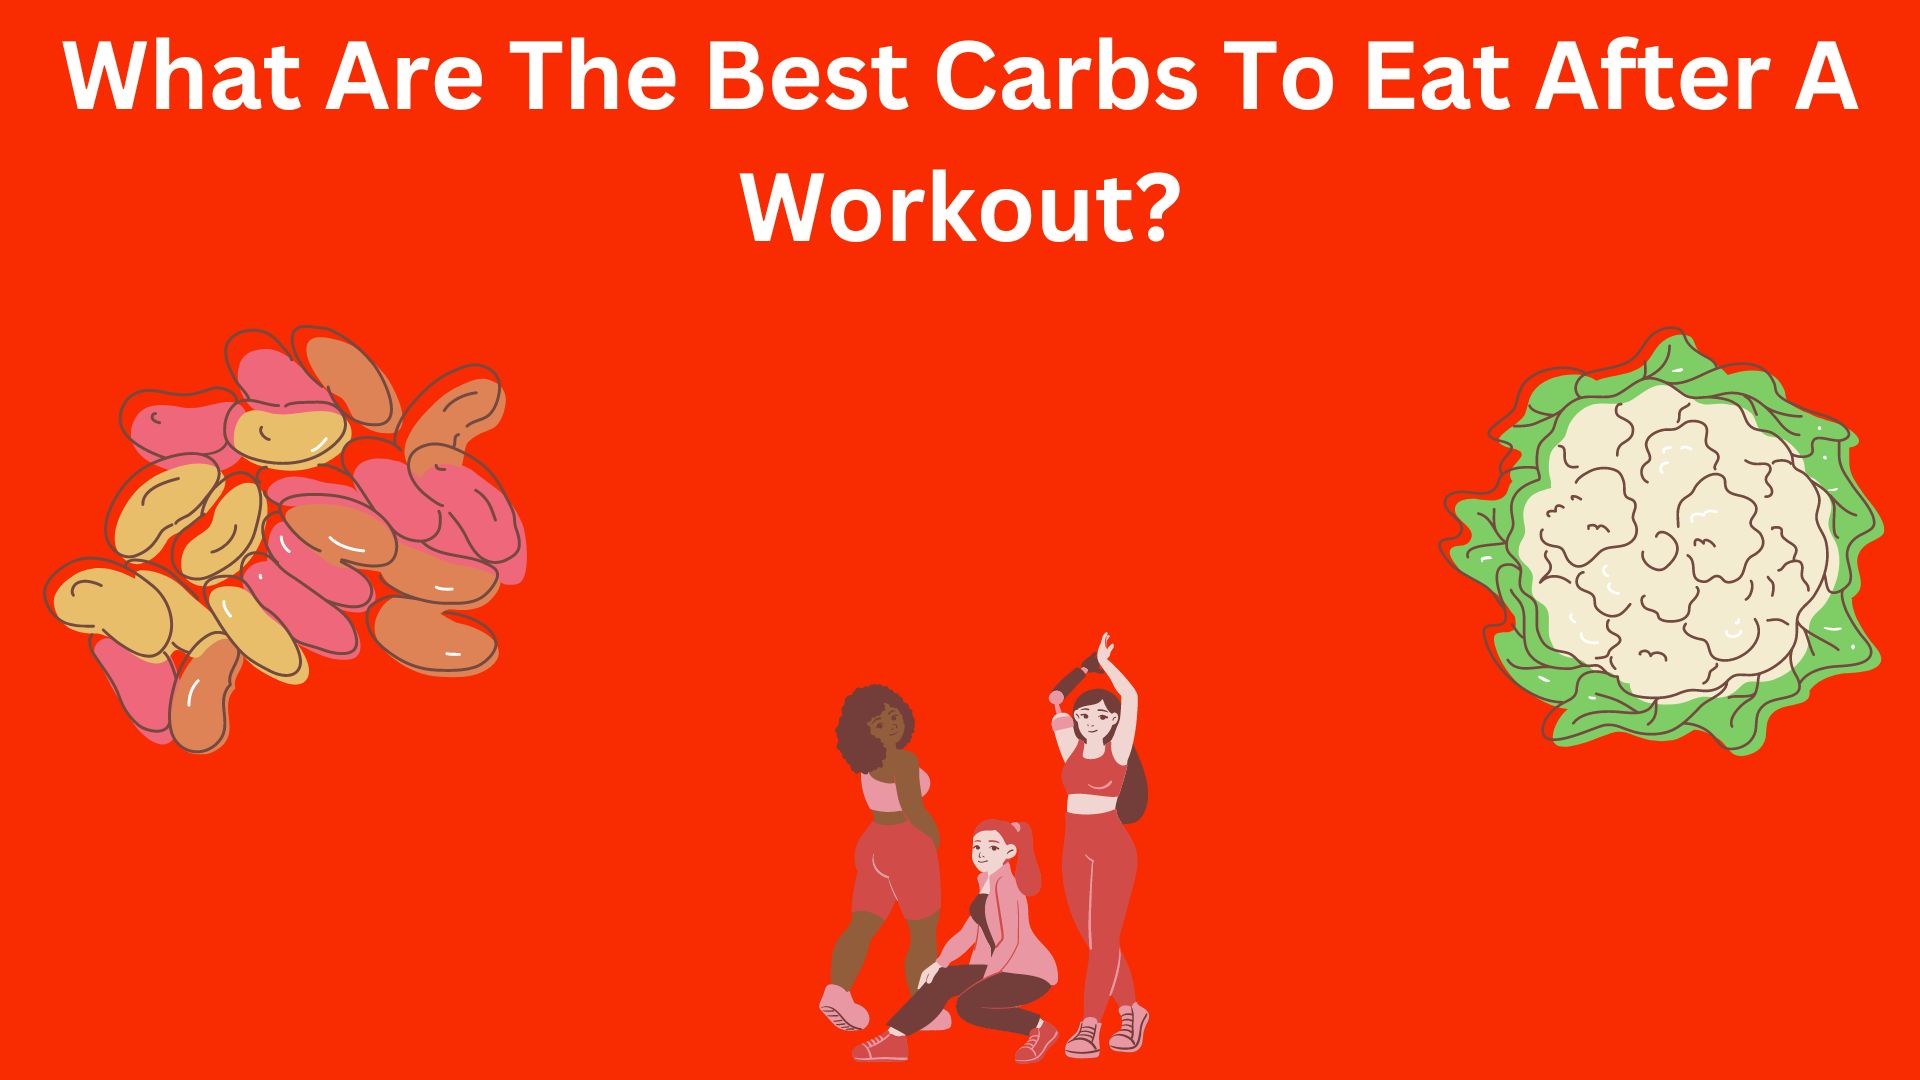 What Are The Best Carbs To Eat After A Workout